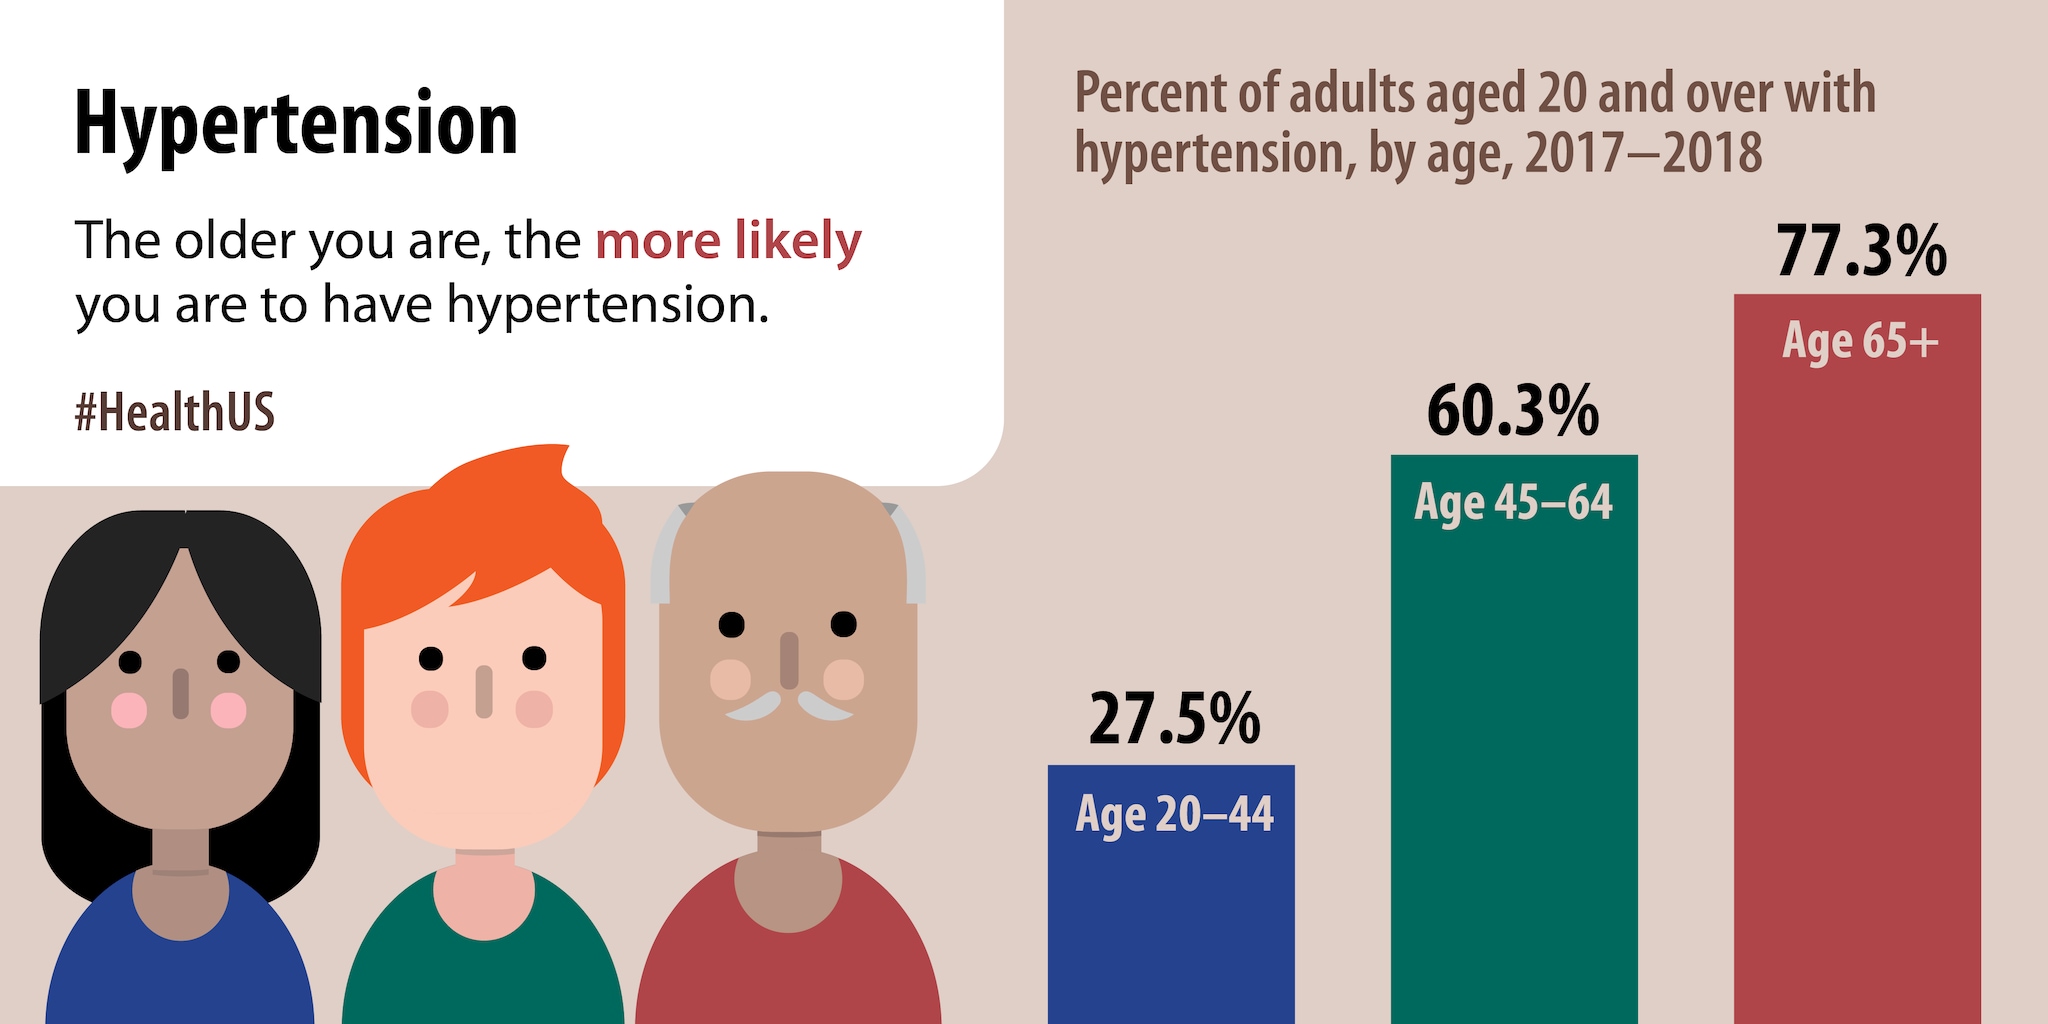 The older you are, the more likely you are to have hypertension.